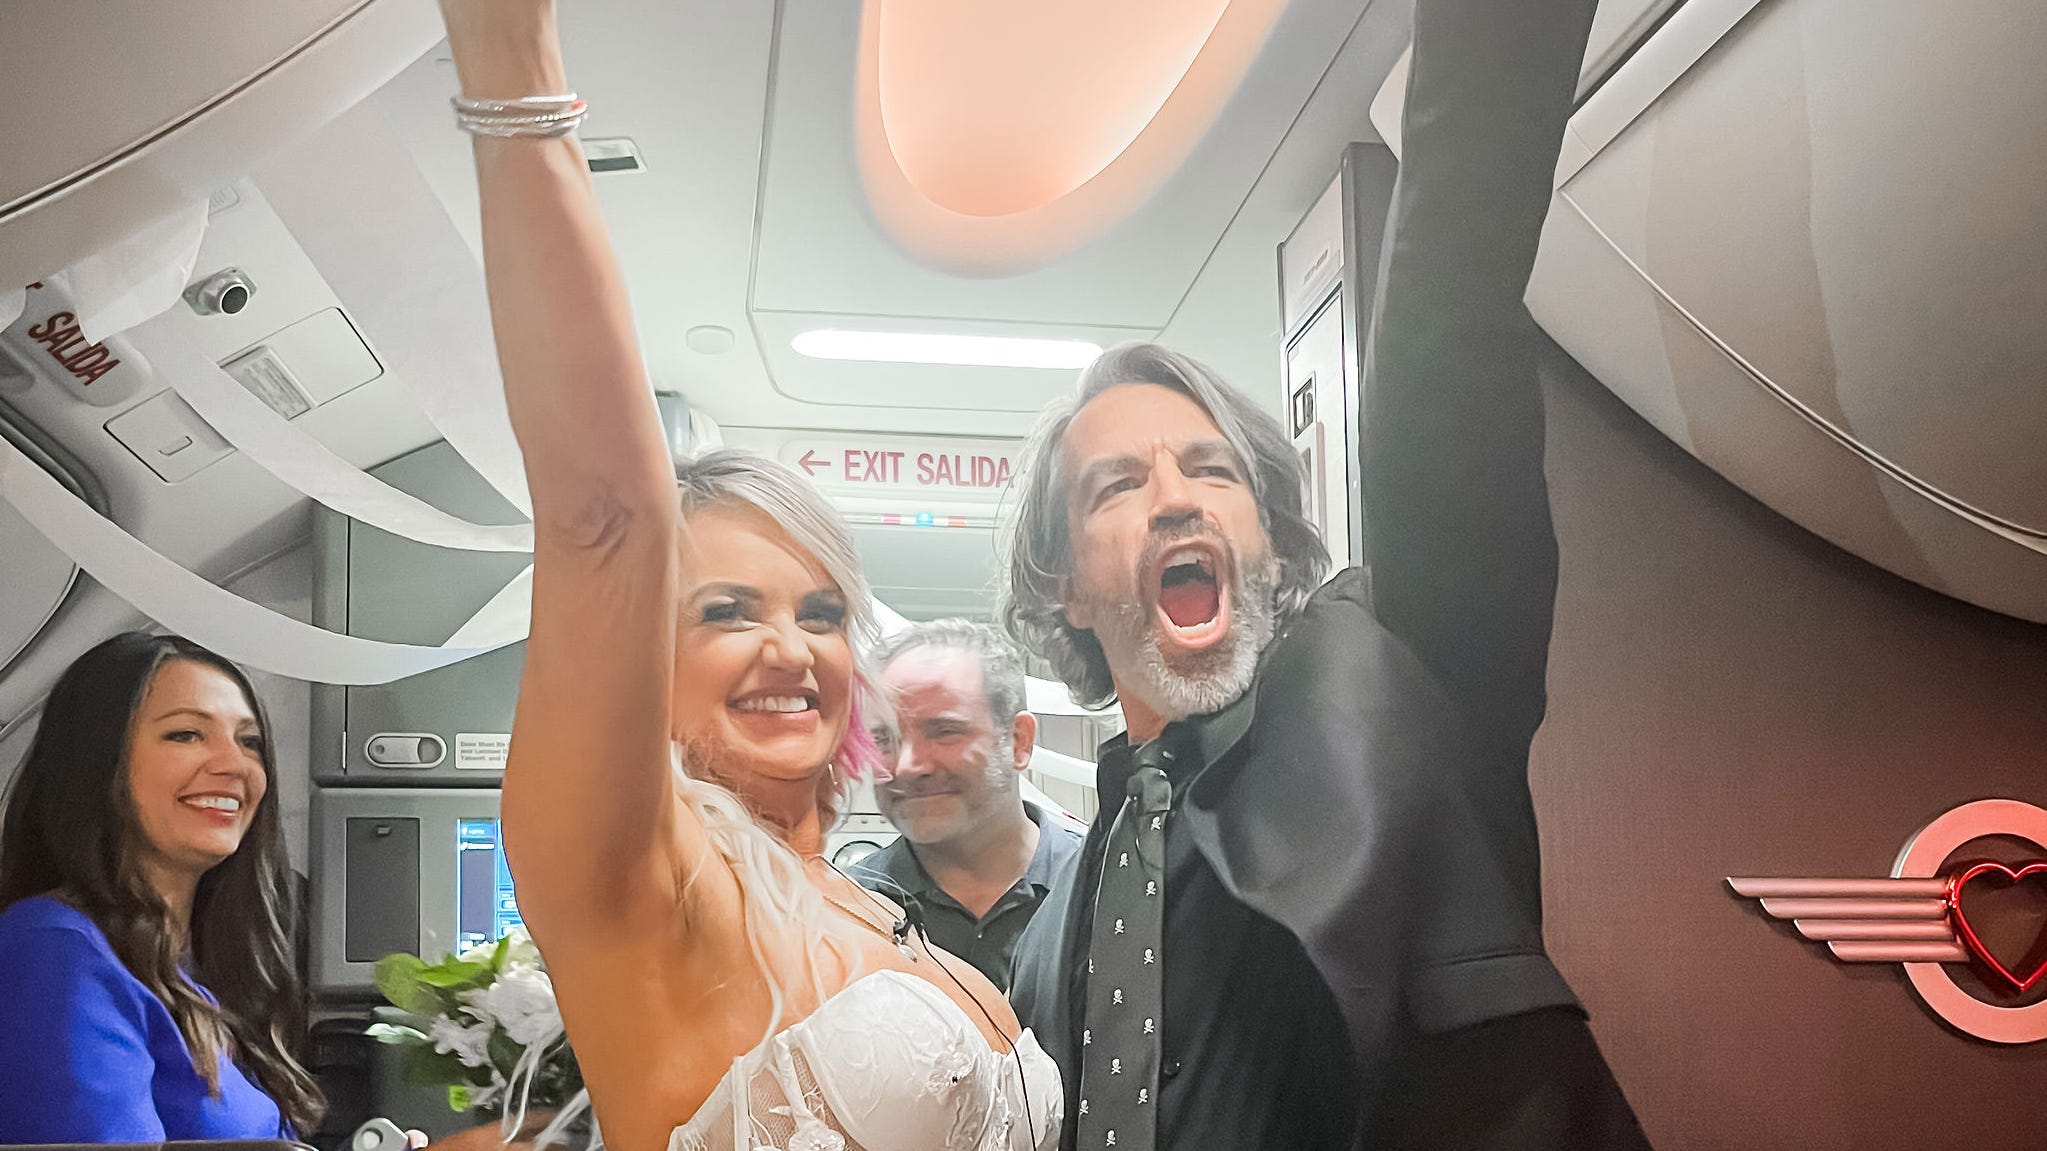 Their Vegas wedding wasn't going to happen. So they got married on a plane to Phoenix